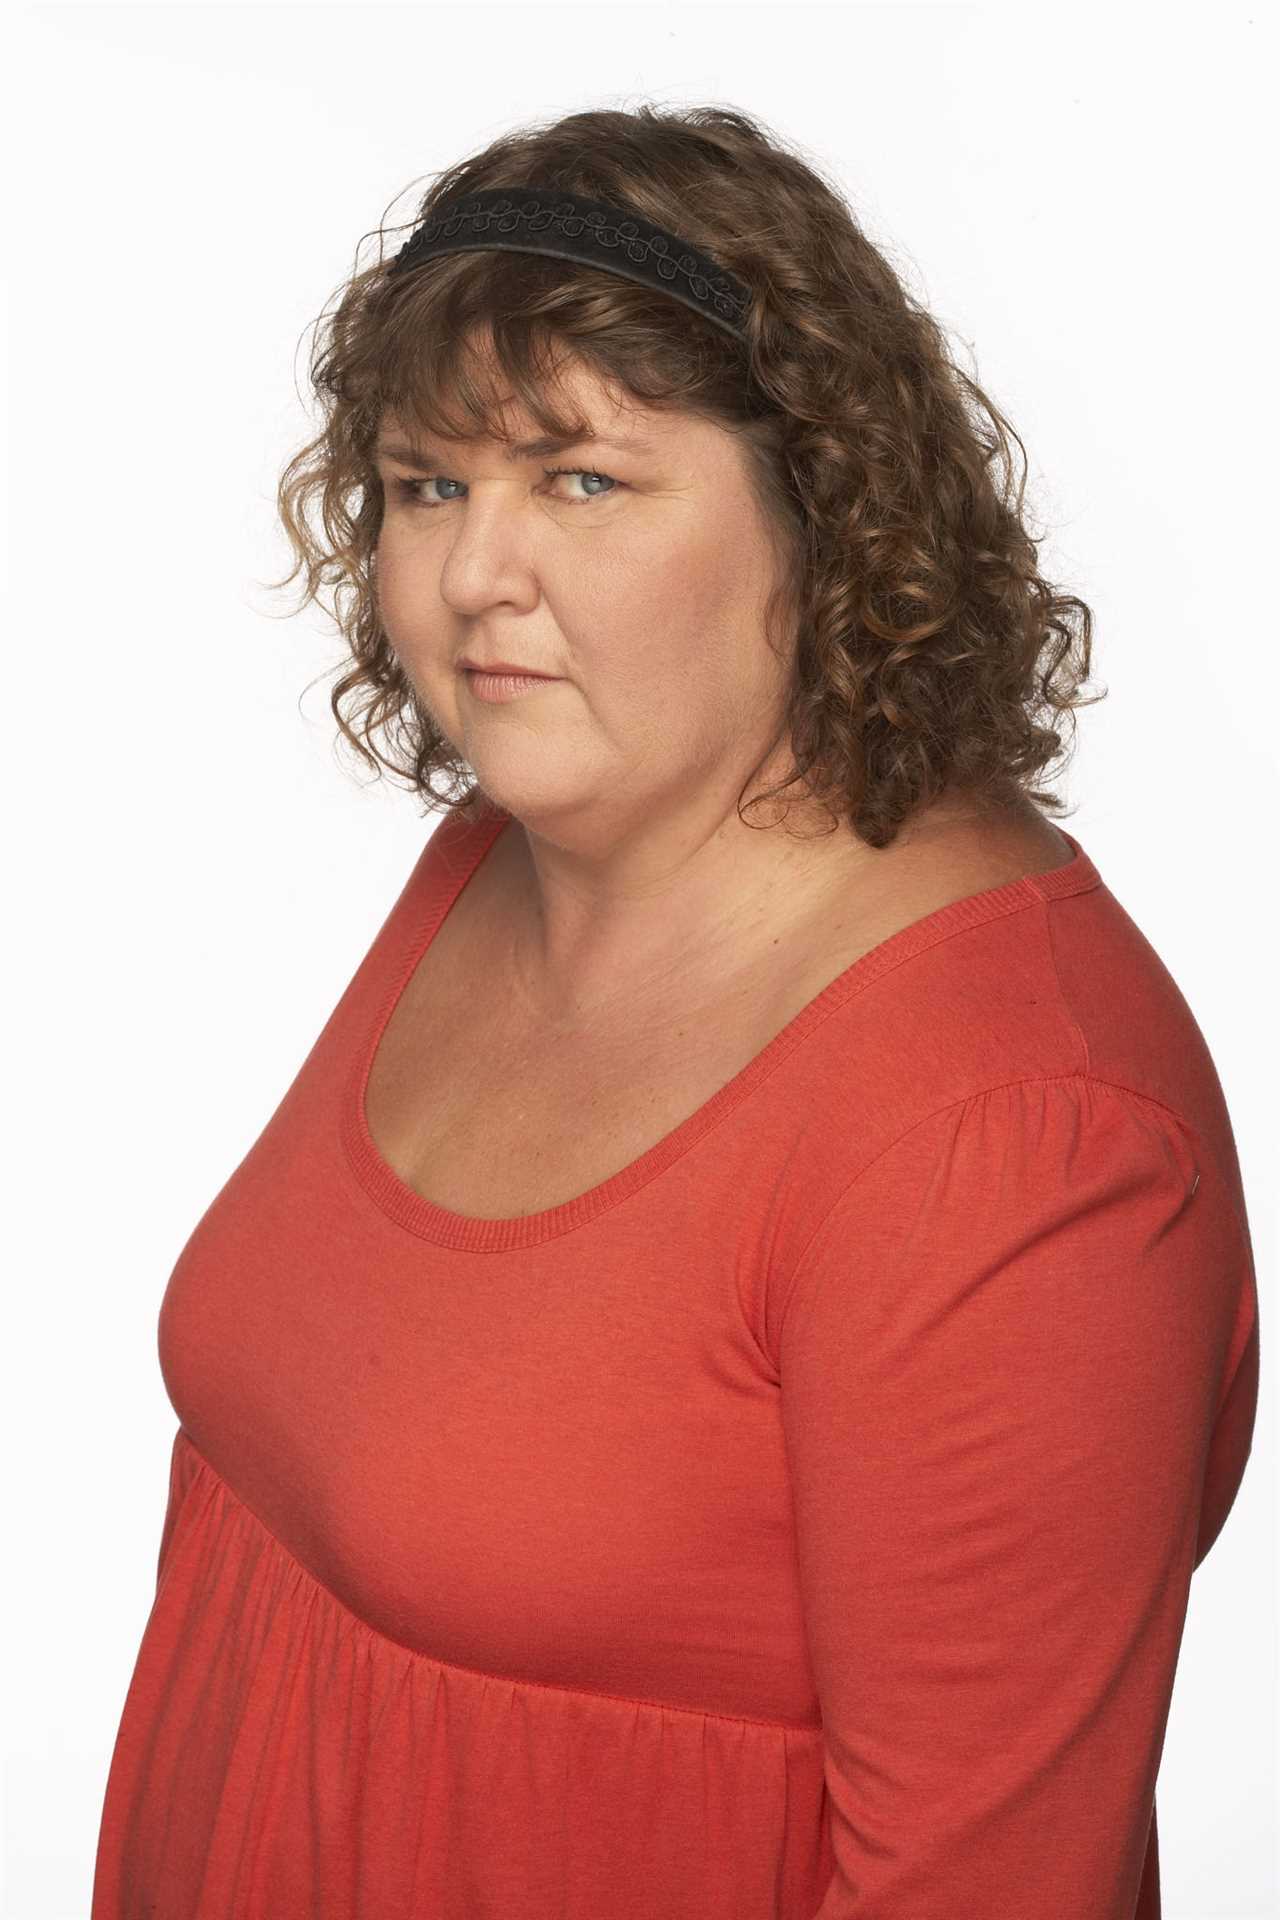 EastEnders legend Cheryl Fergison celebrates her birthday in style – but fans can’t believe her age